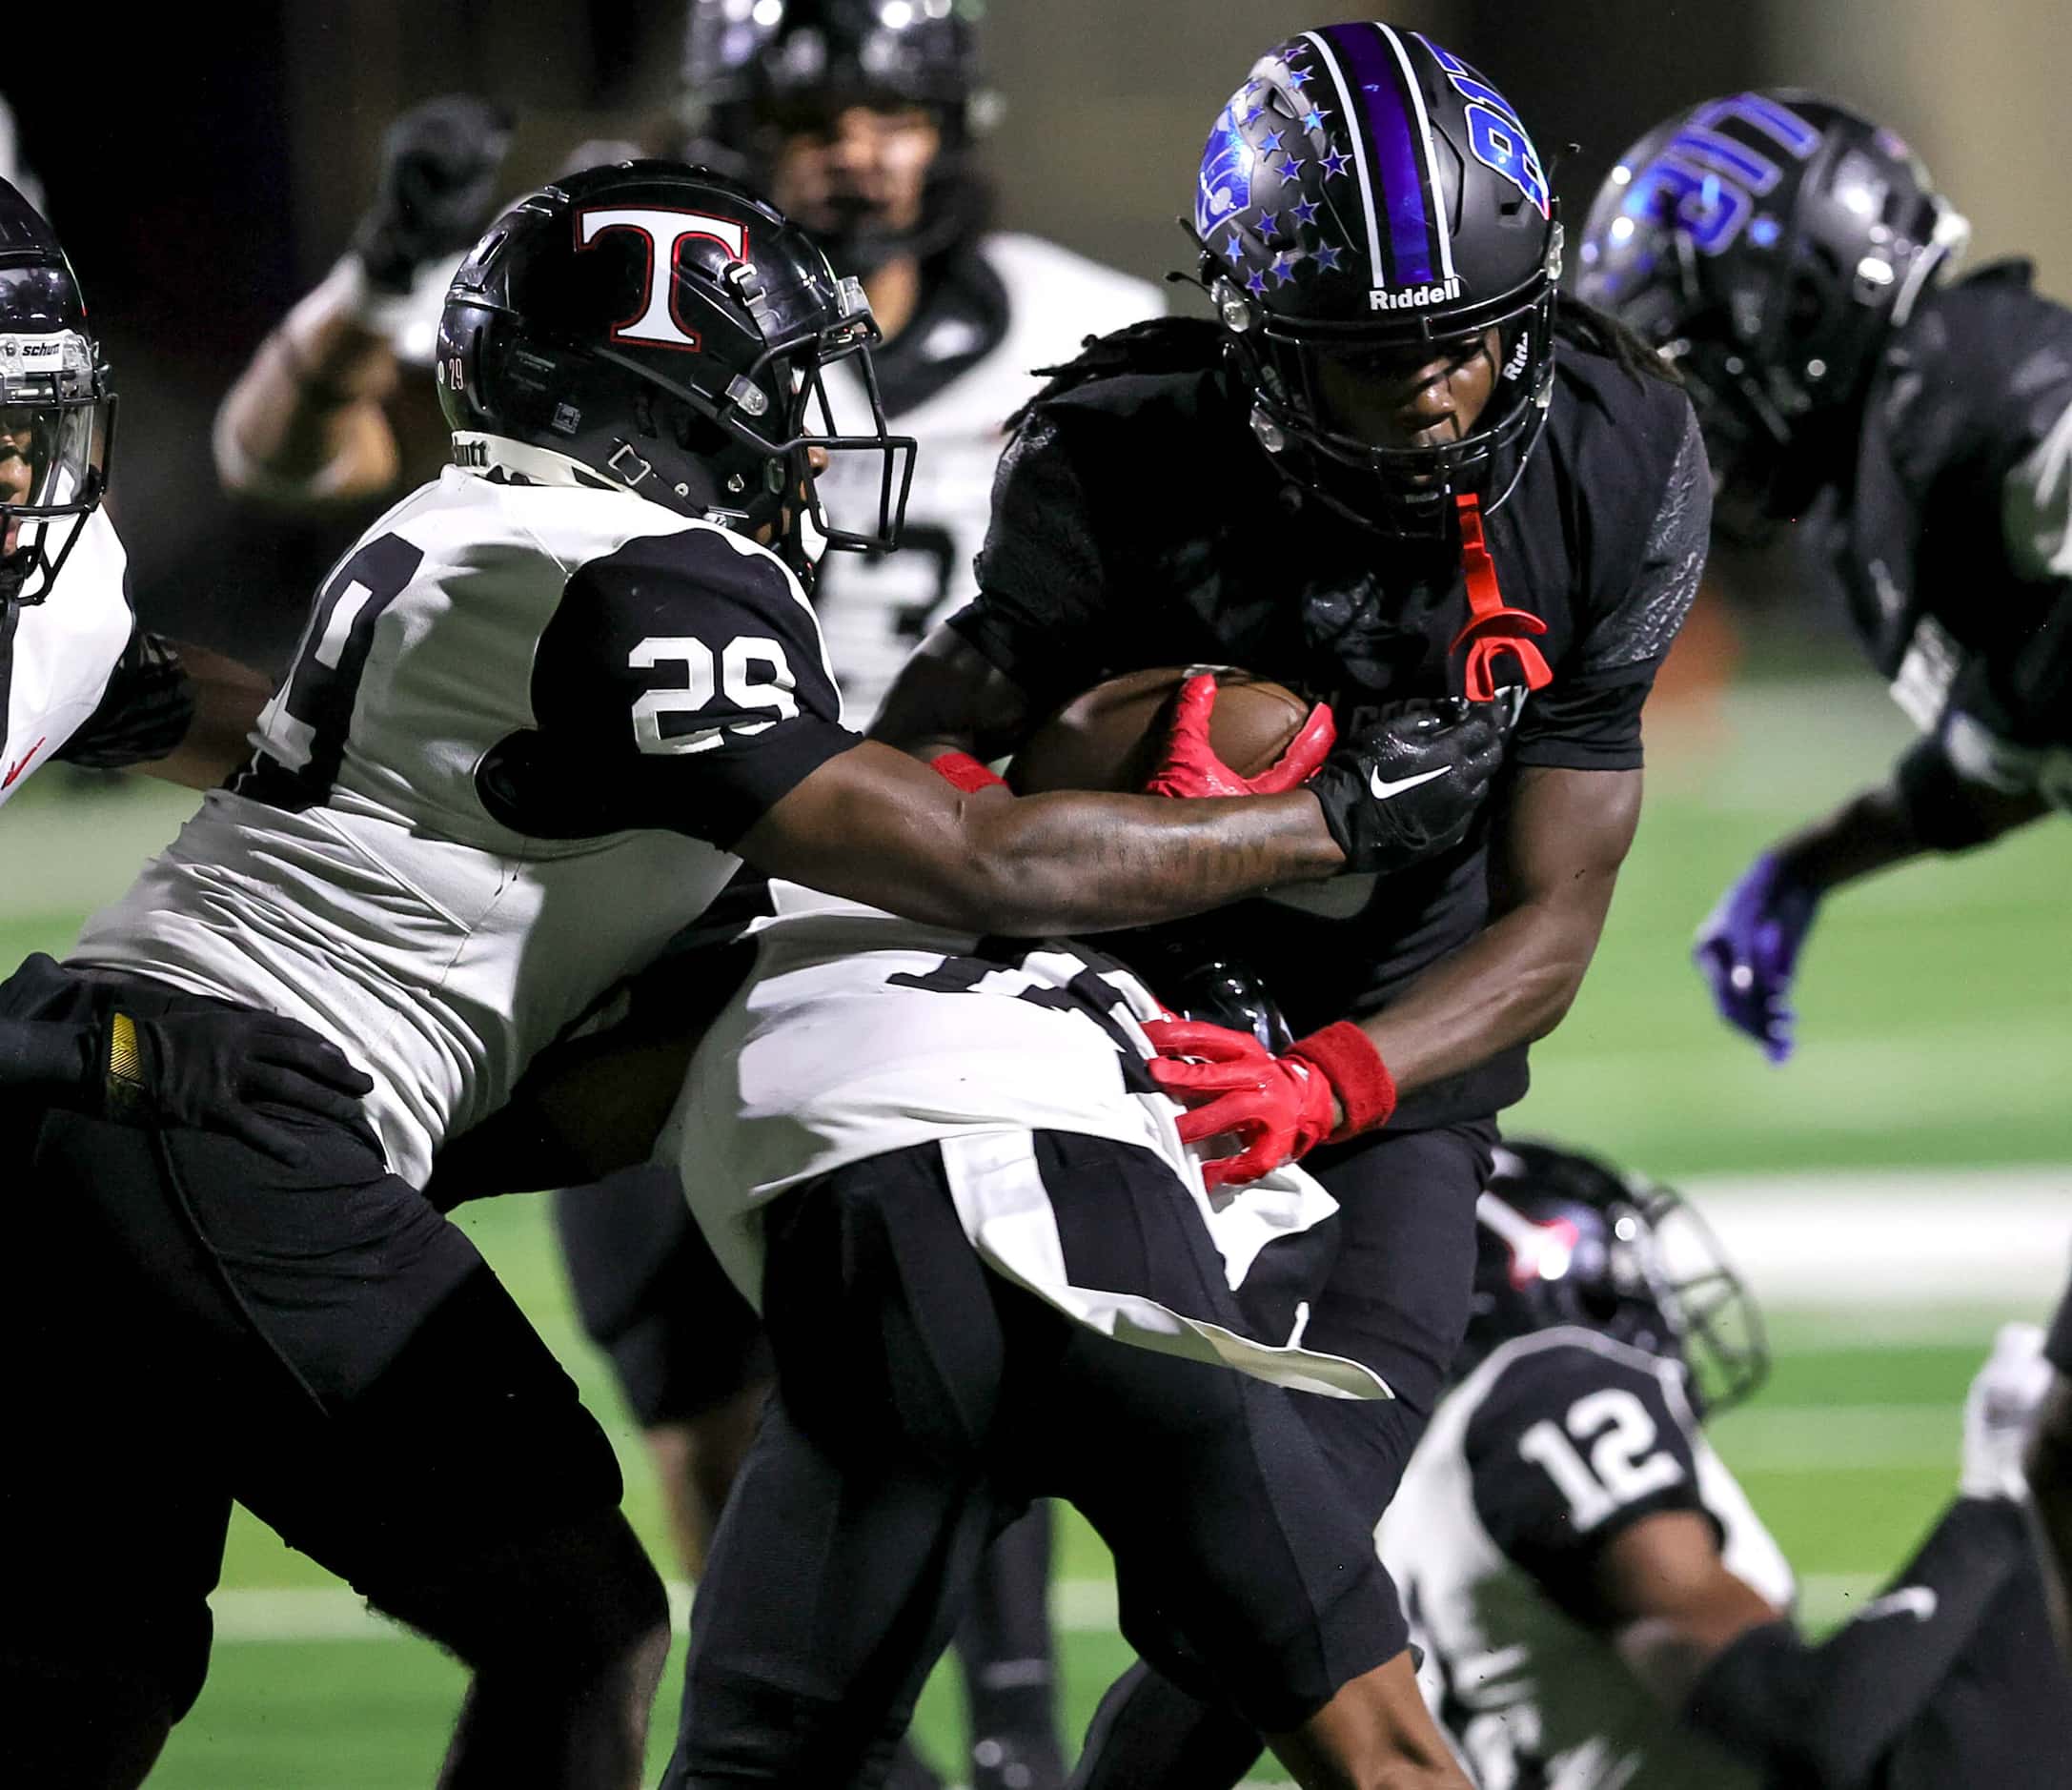 North Crowley wide receiver Dekoryian West-Davis (3) fights for yardage against Euless...